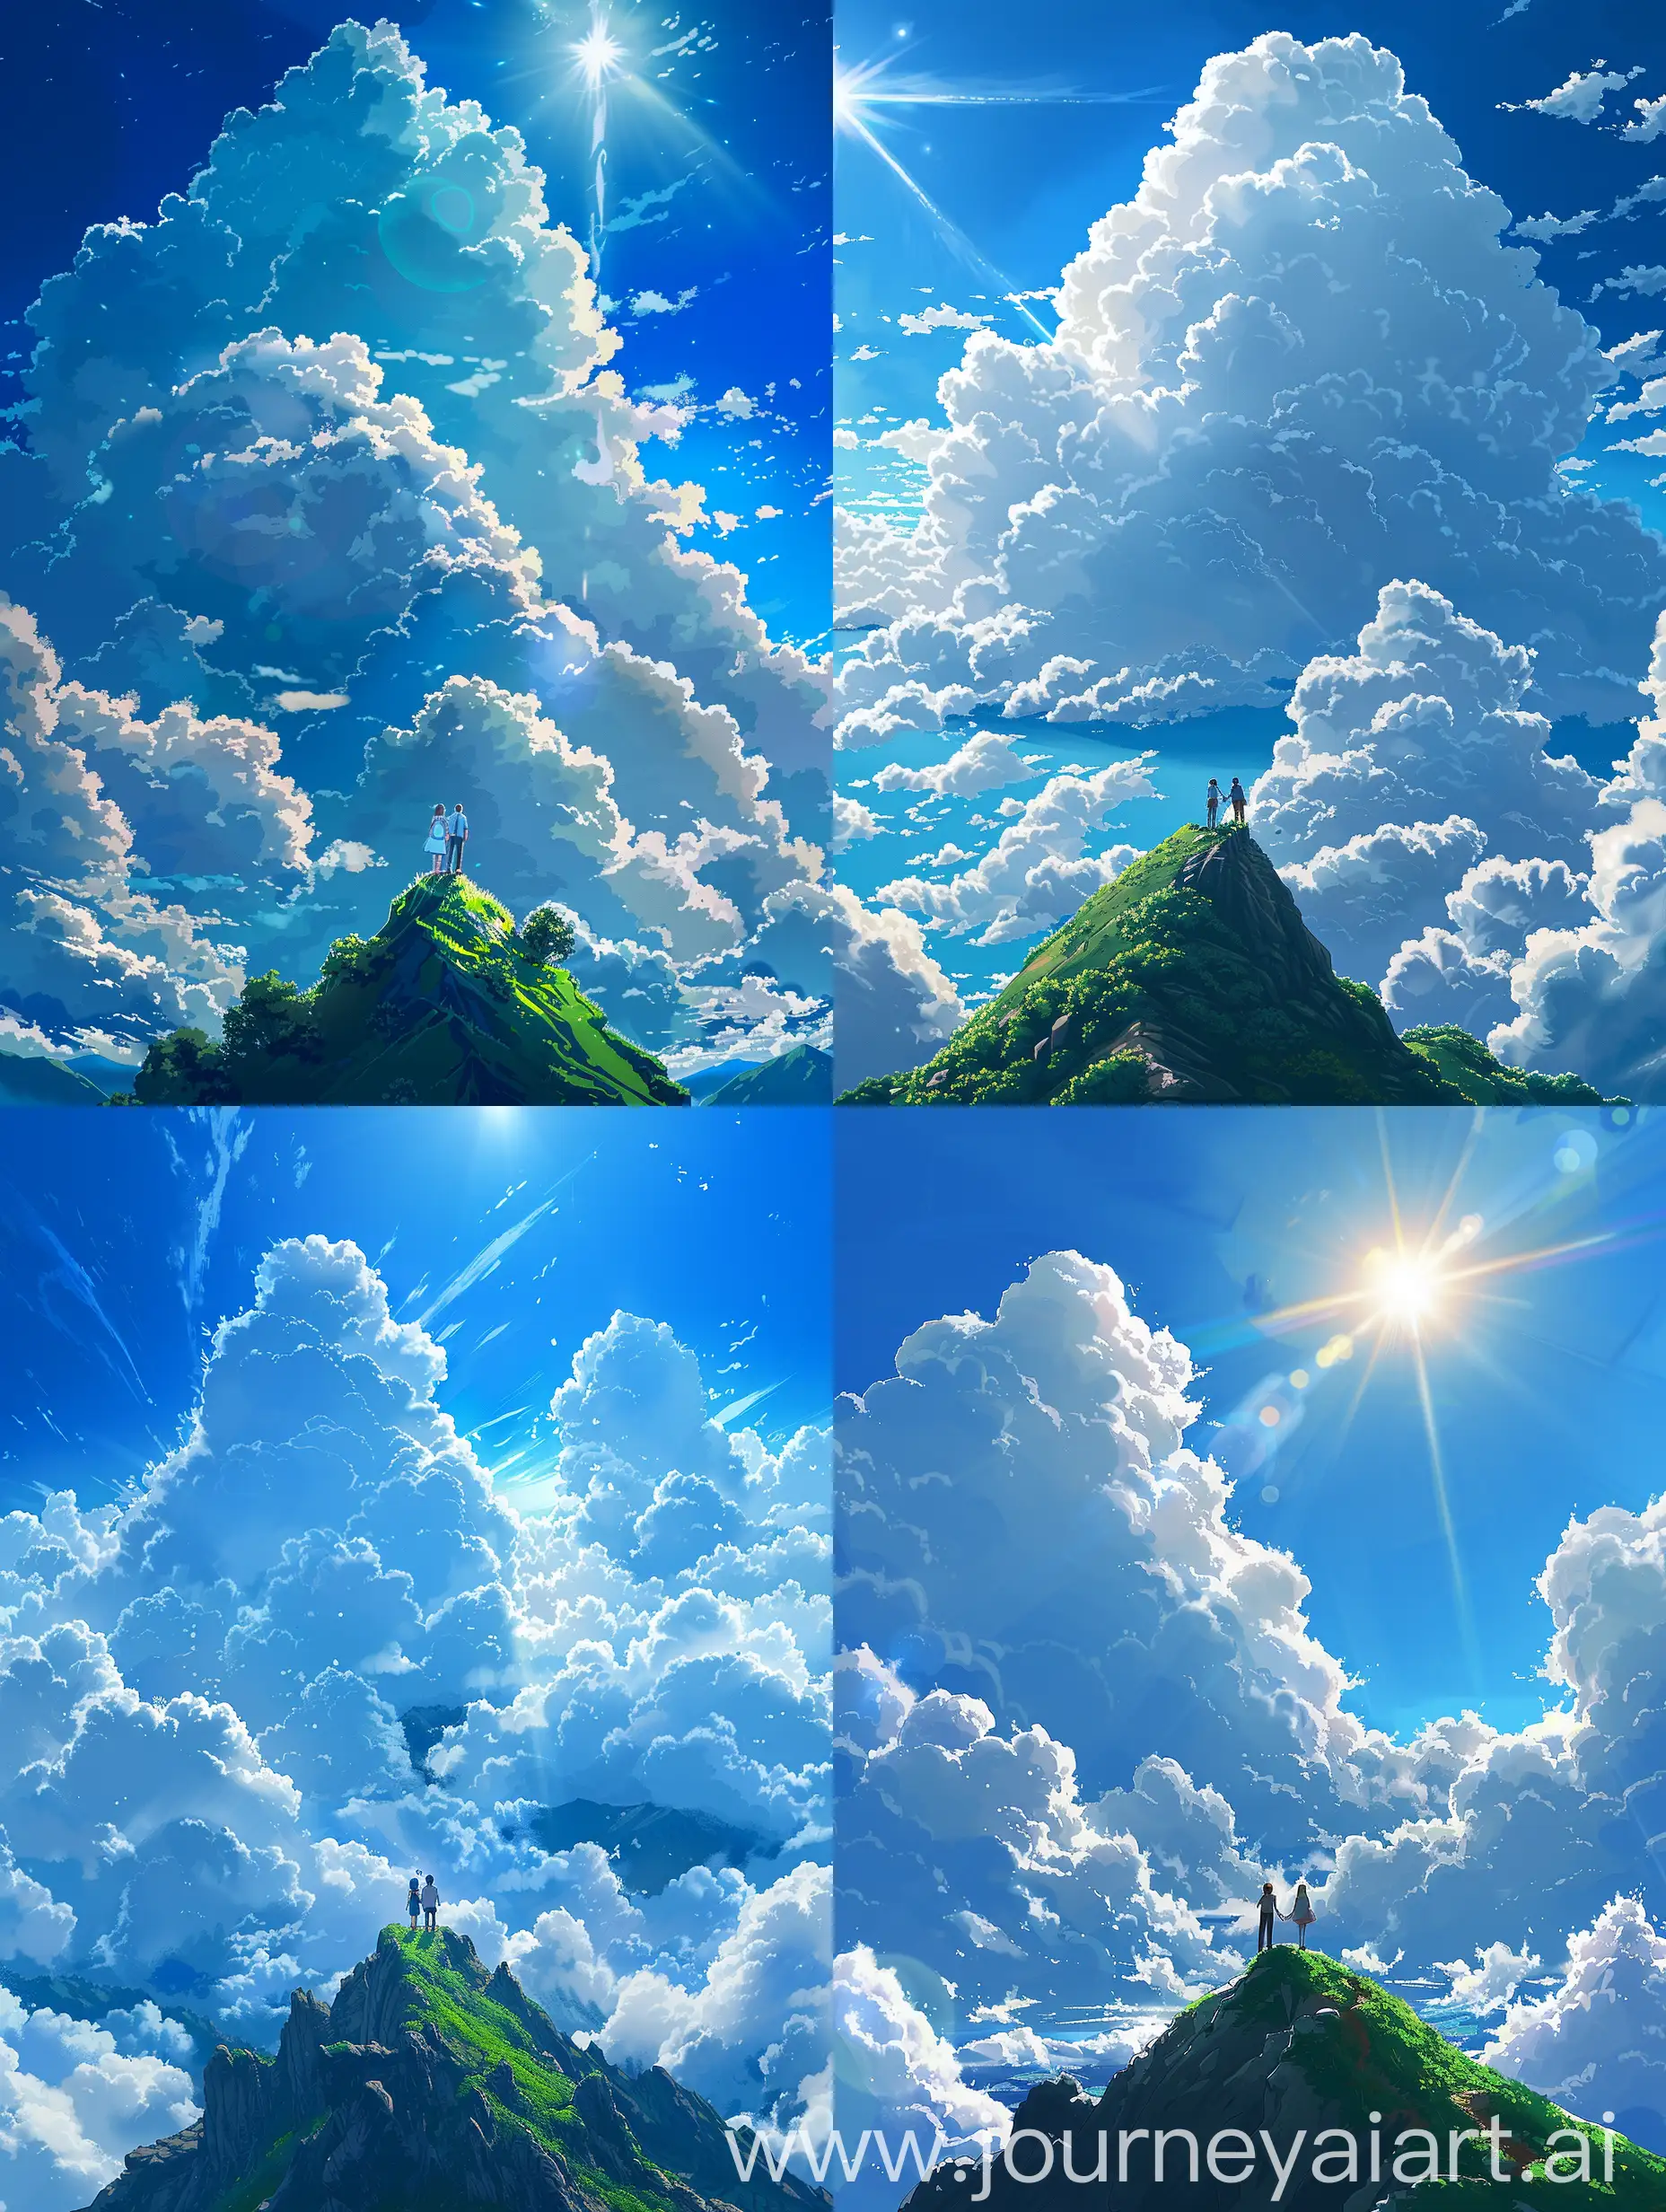 3d anime style of  sky is a deep blue, suggesting it might be a clear day. It's filled with bright full of fluffy, white clouds that are well-lit by the sunlight, giving them a bright and soft appearance. There's a green mountain  peak visible at the lower part of the image and a couple standing at the top. This indicates that the viewer might be at a high vantage point, possibly on another mountain or a high hill.super vibrant,cinematic